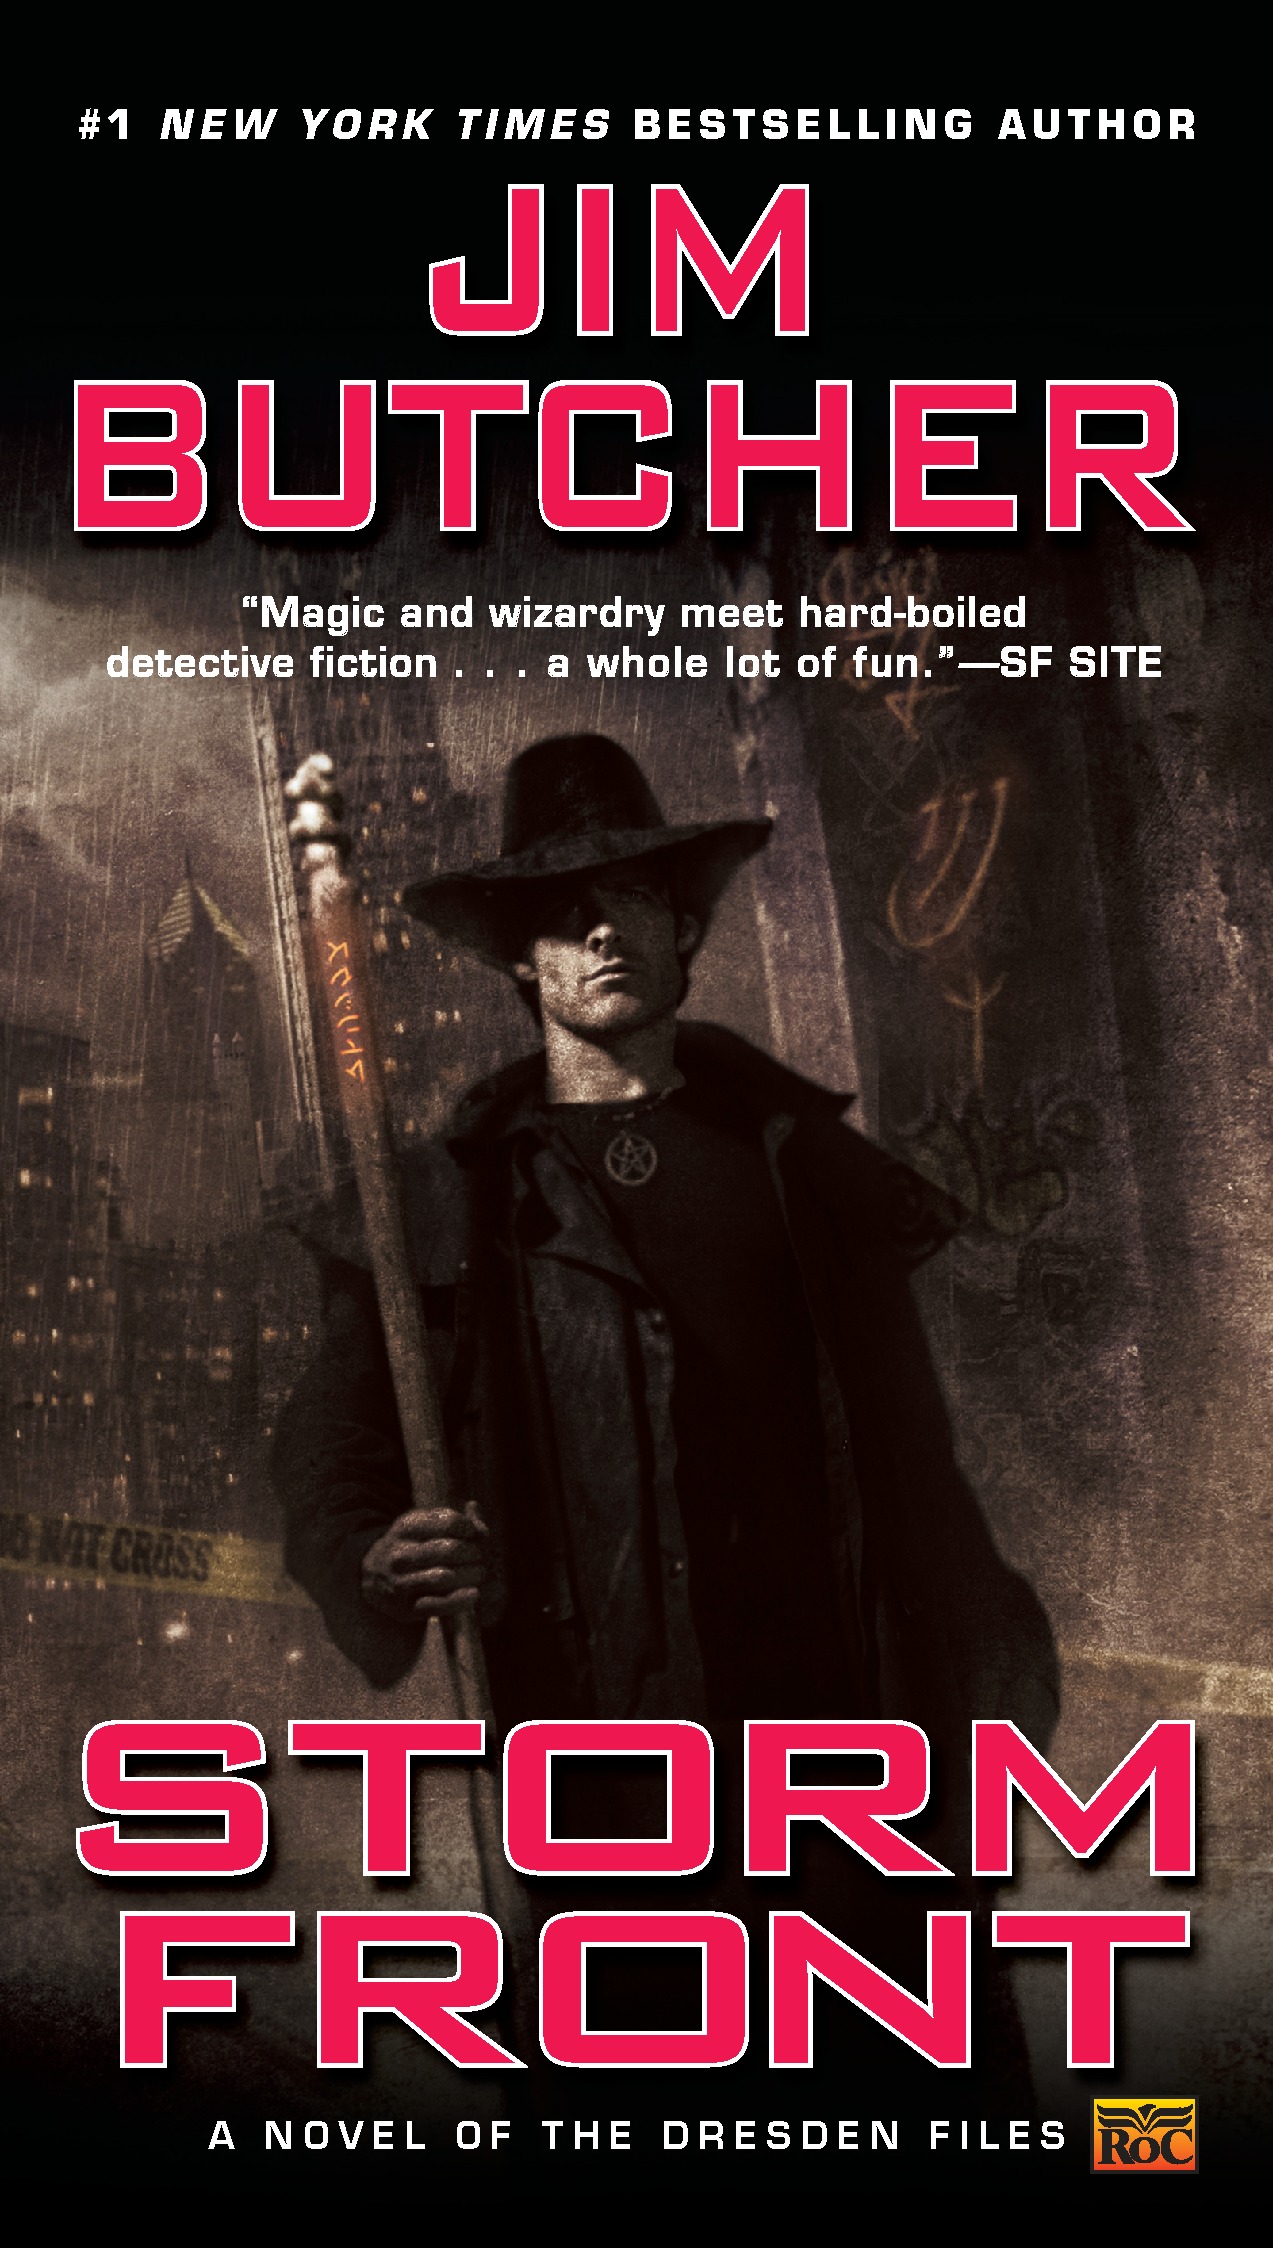 [EPUB] The Dresden Files #1 Storm Front by Jim Butcher